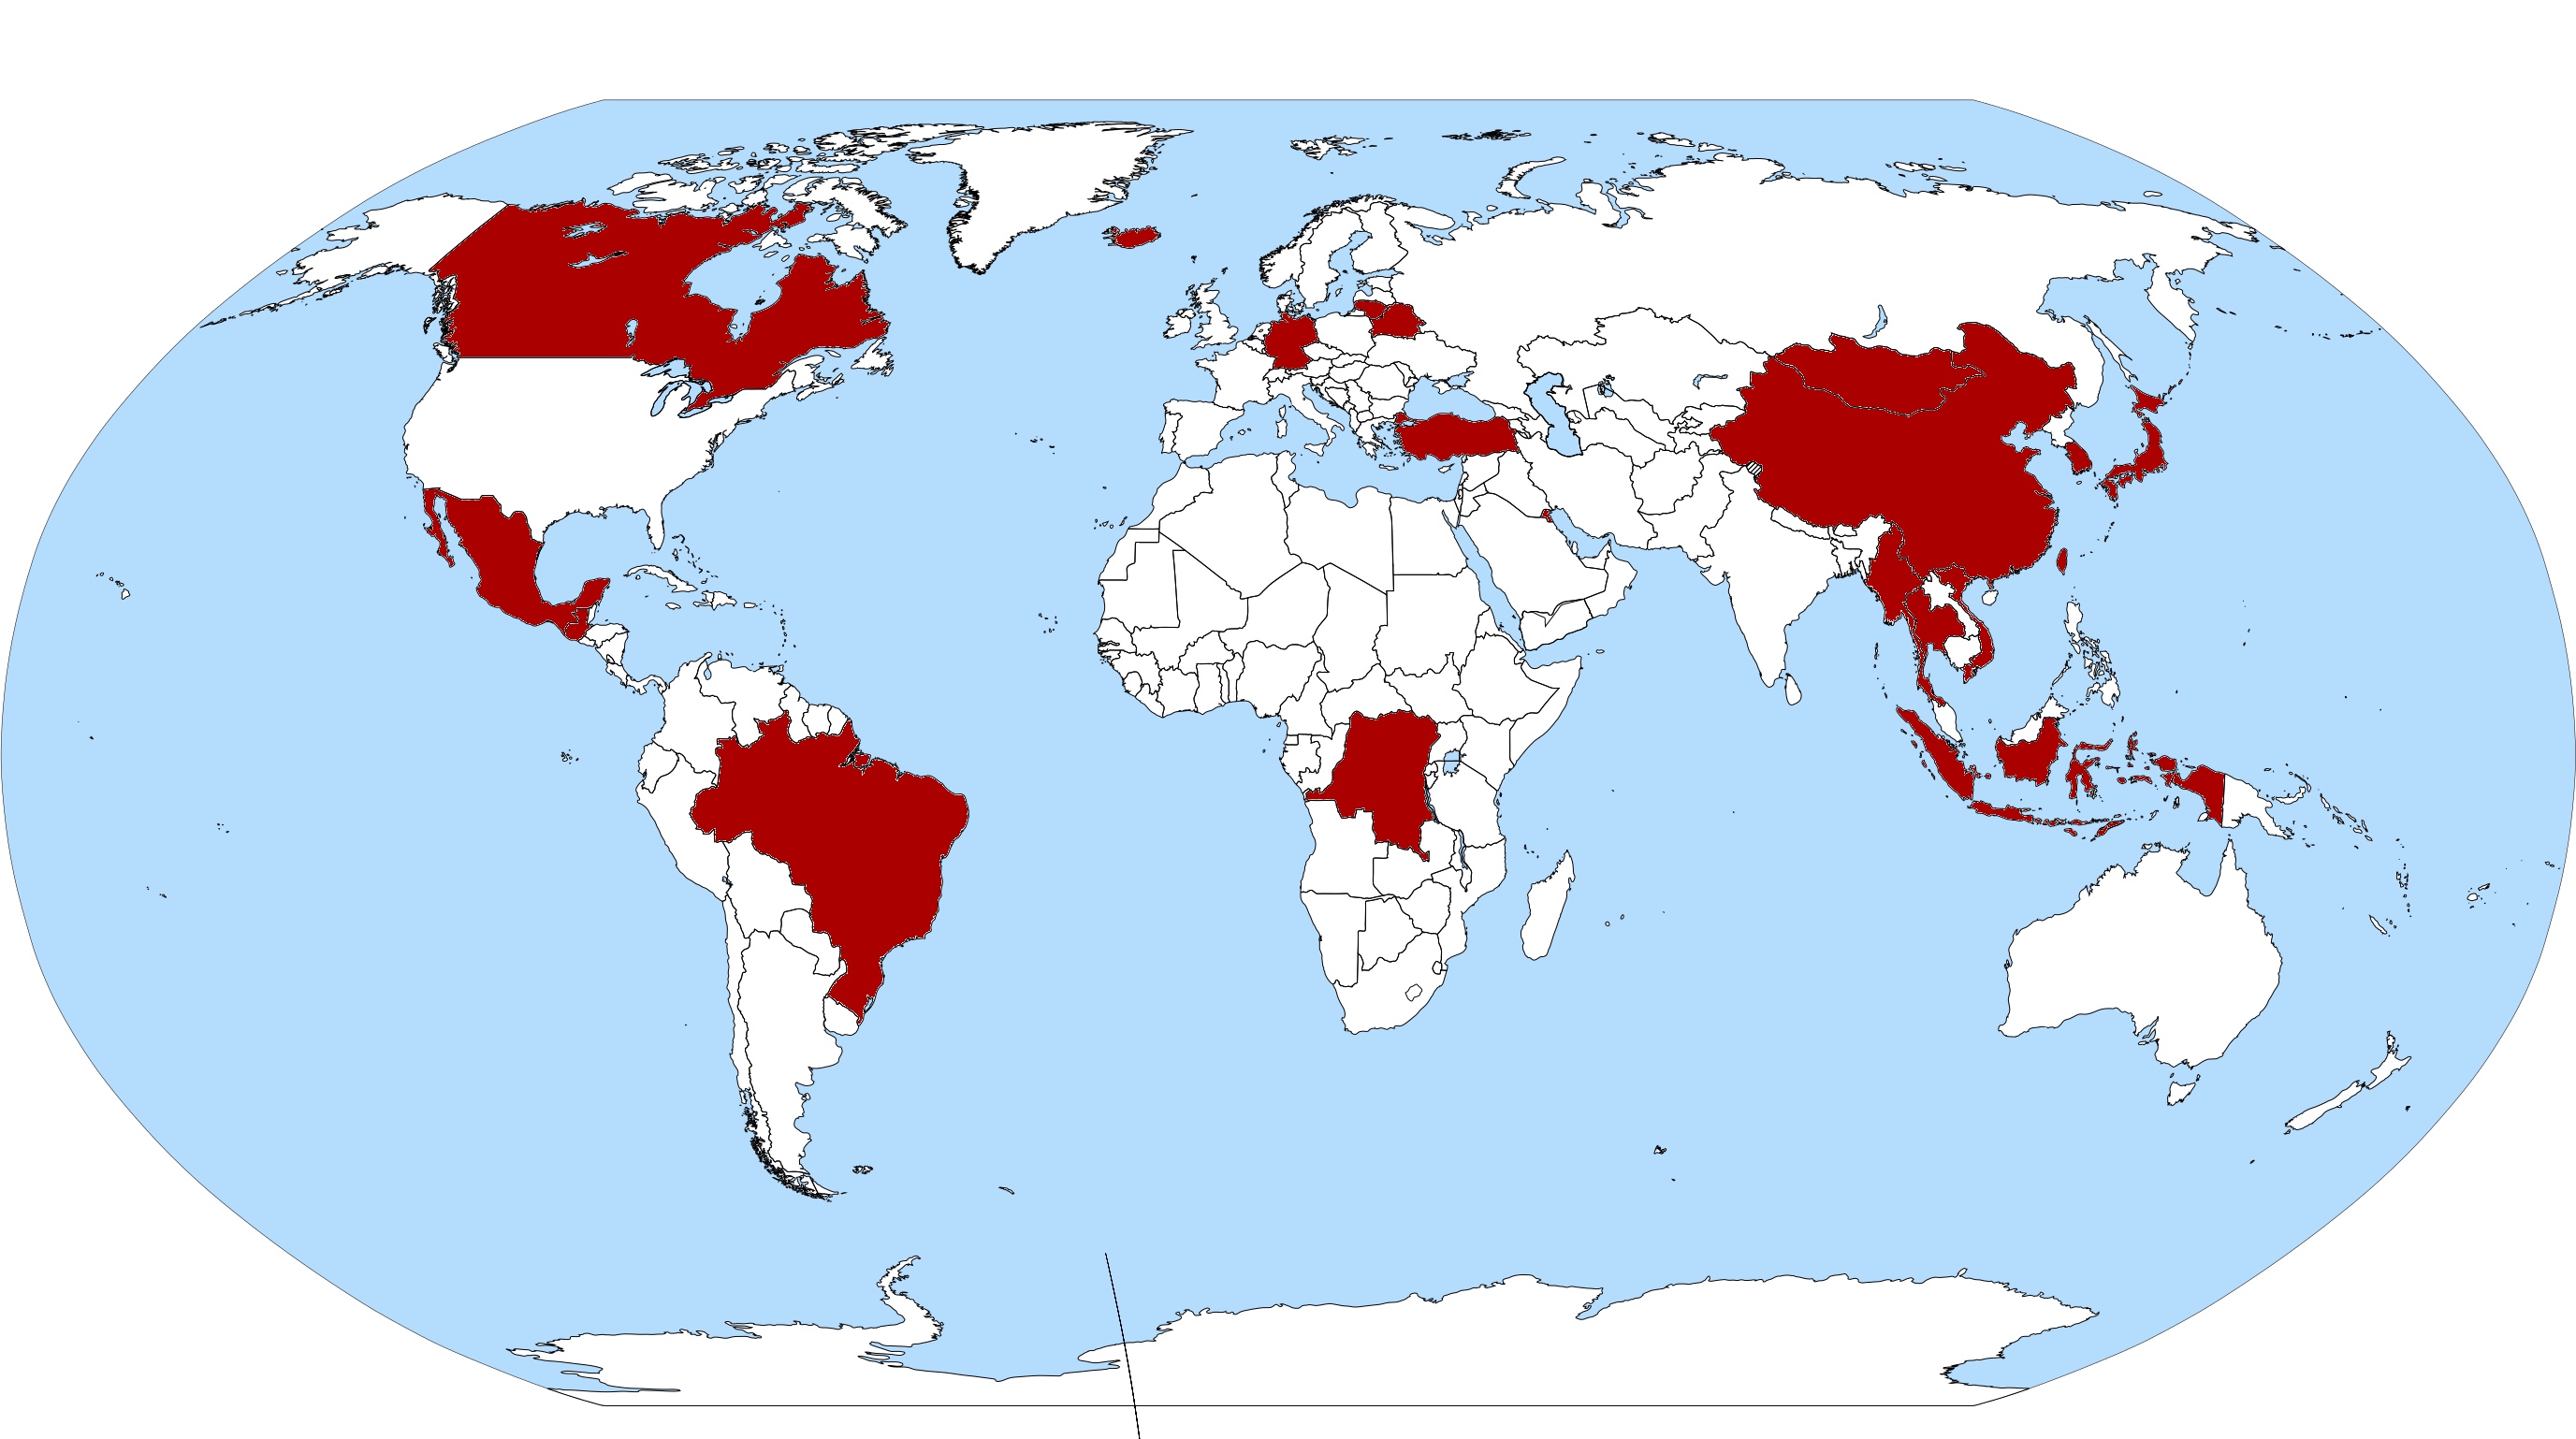 A map of the origin countries of the ELCB students for the past academic years: Belarus, Brazil, Canada, China, Congo, Germany, Guatemala, Hong Kong, Iceland, Indonesia, Japan, Kuwait, Lithuania, Mexico, Mongolia, Myanmar, South Korea, Taiwan, Thailand, Turkey, Vietnam